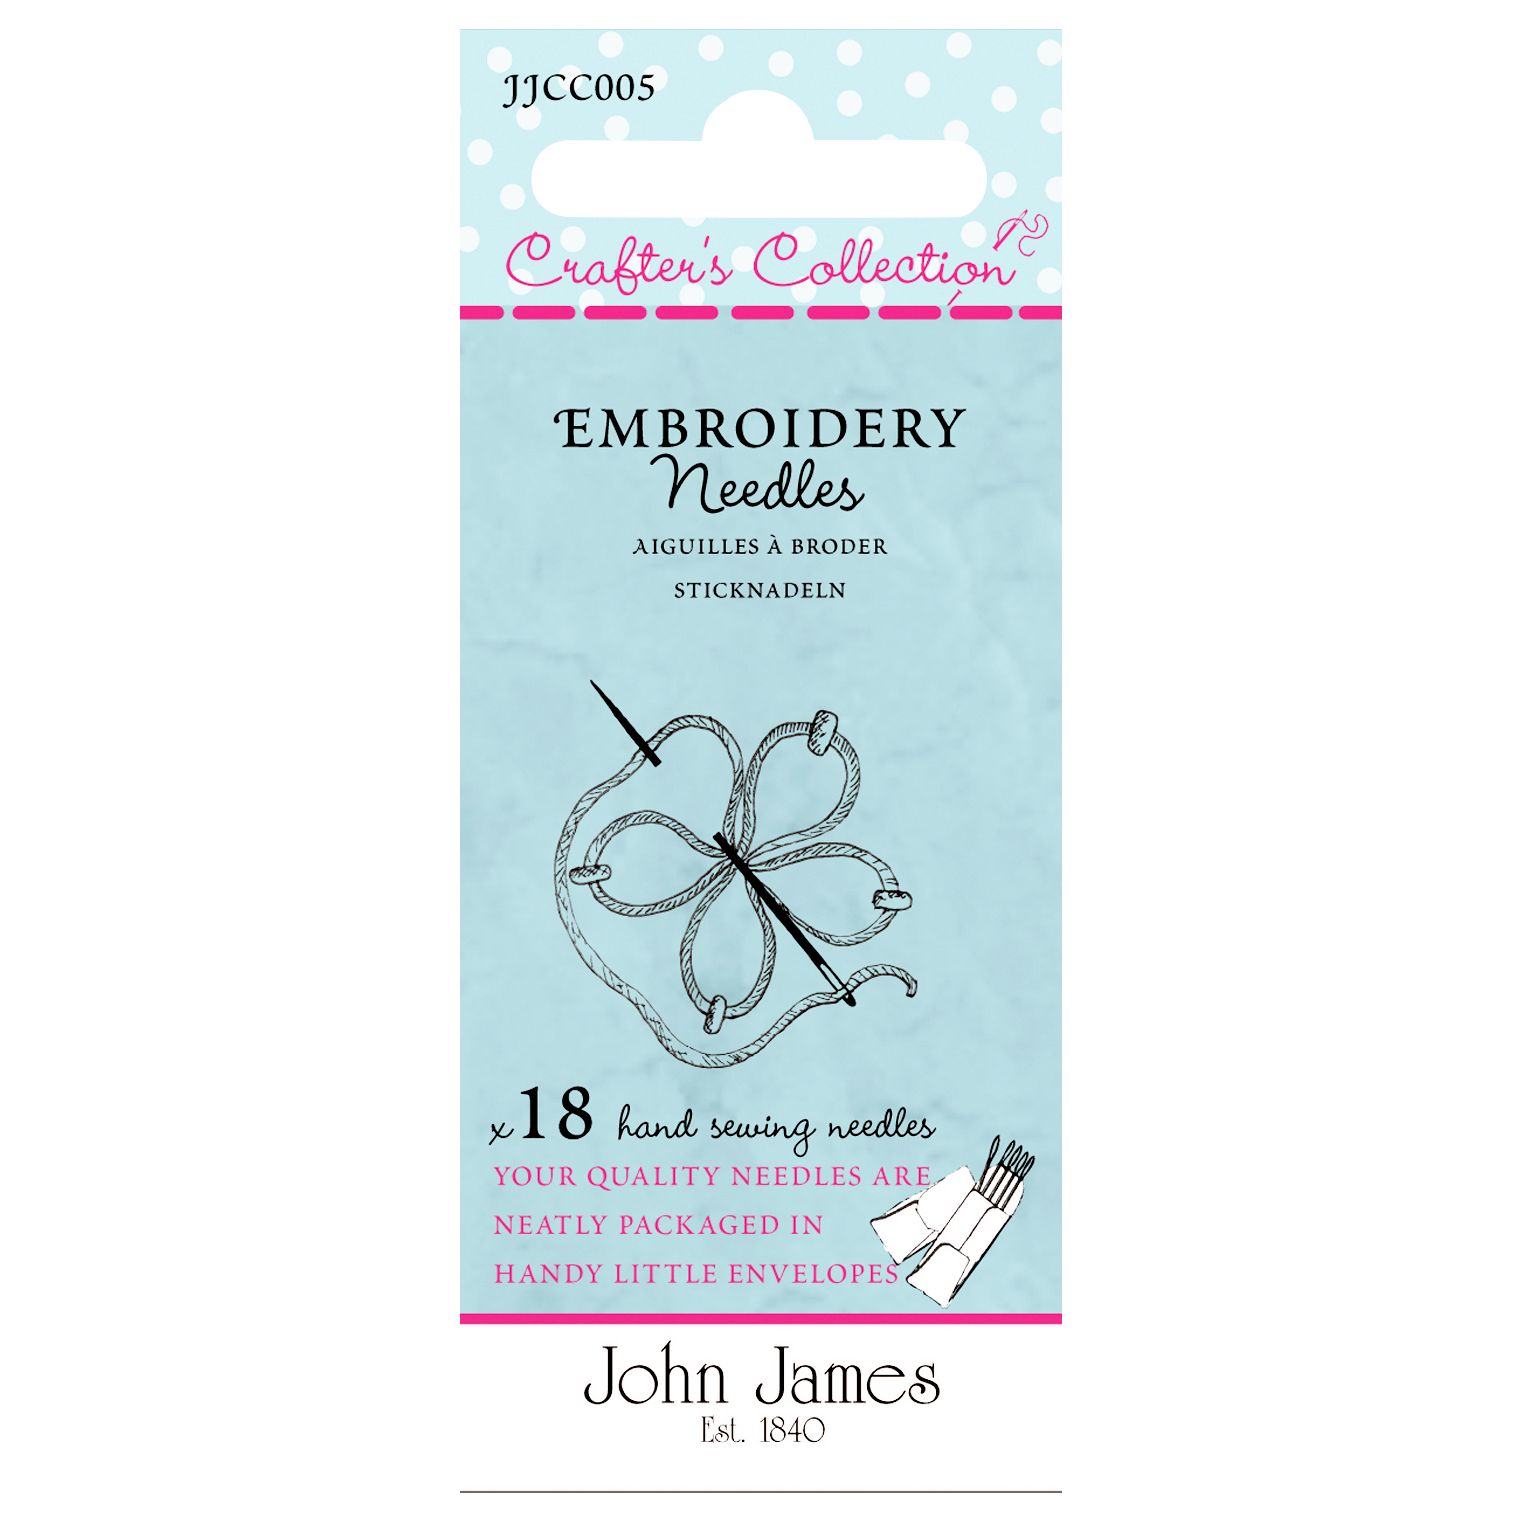 Needles by John James Crafters Collection Embroidery Needles, Sizes 7-10, Pack of 18